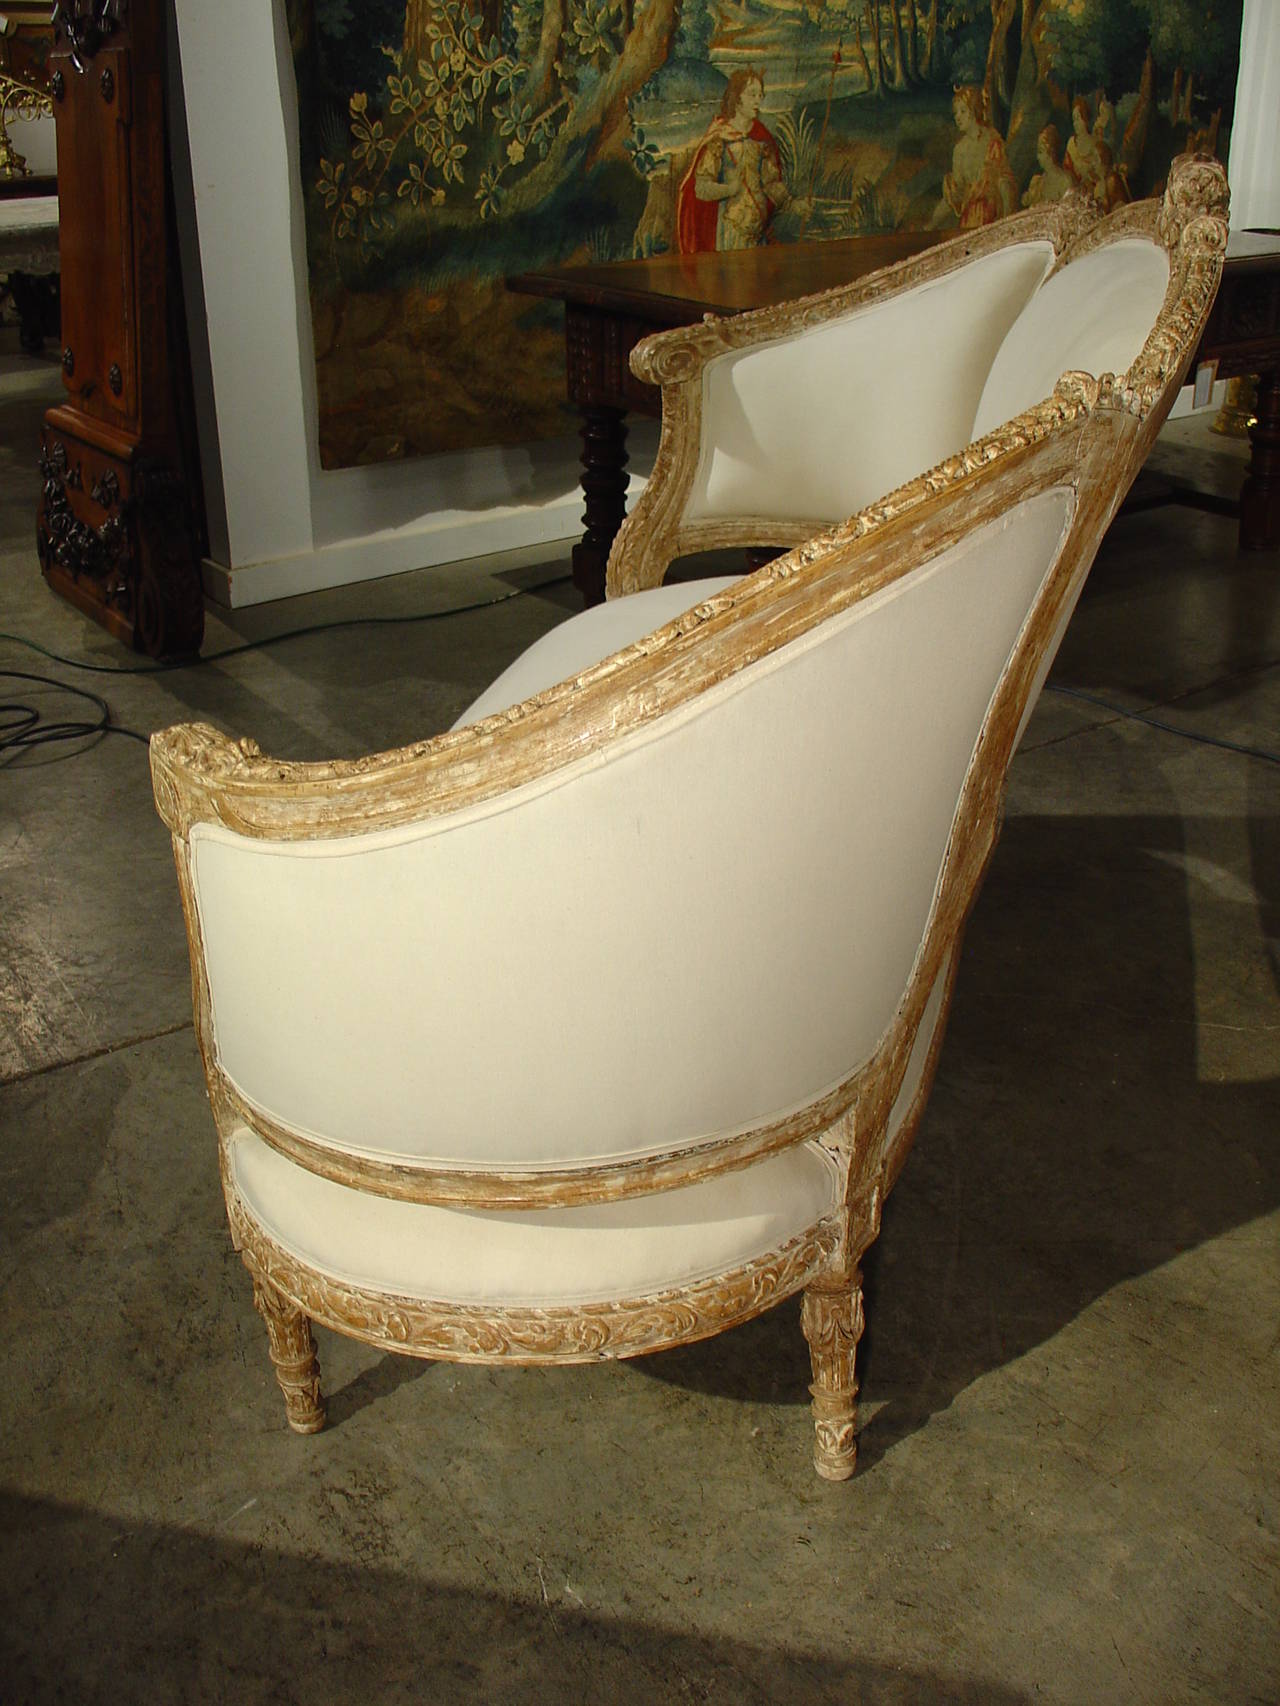 19th Century Beautiful Antique French Parcel Paint Settee with Musical Motifs